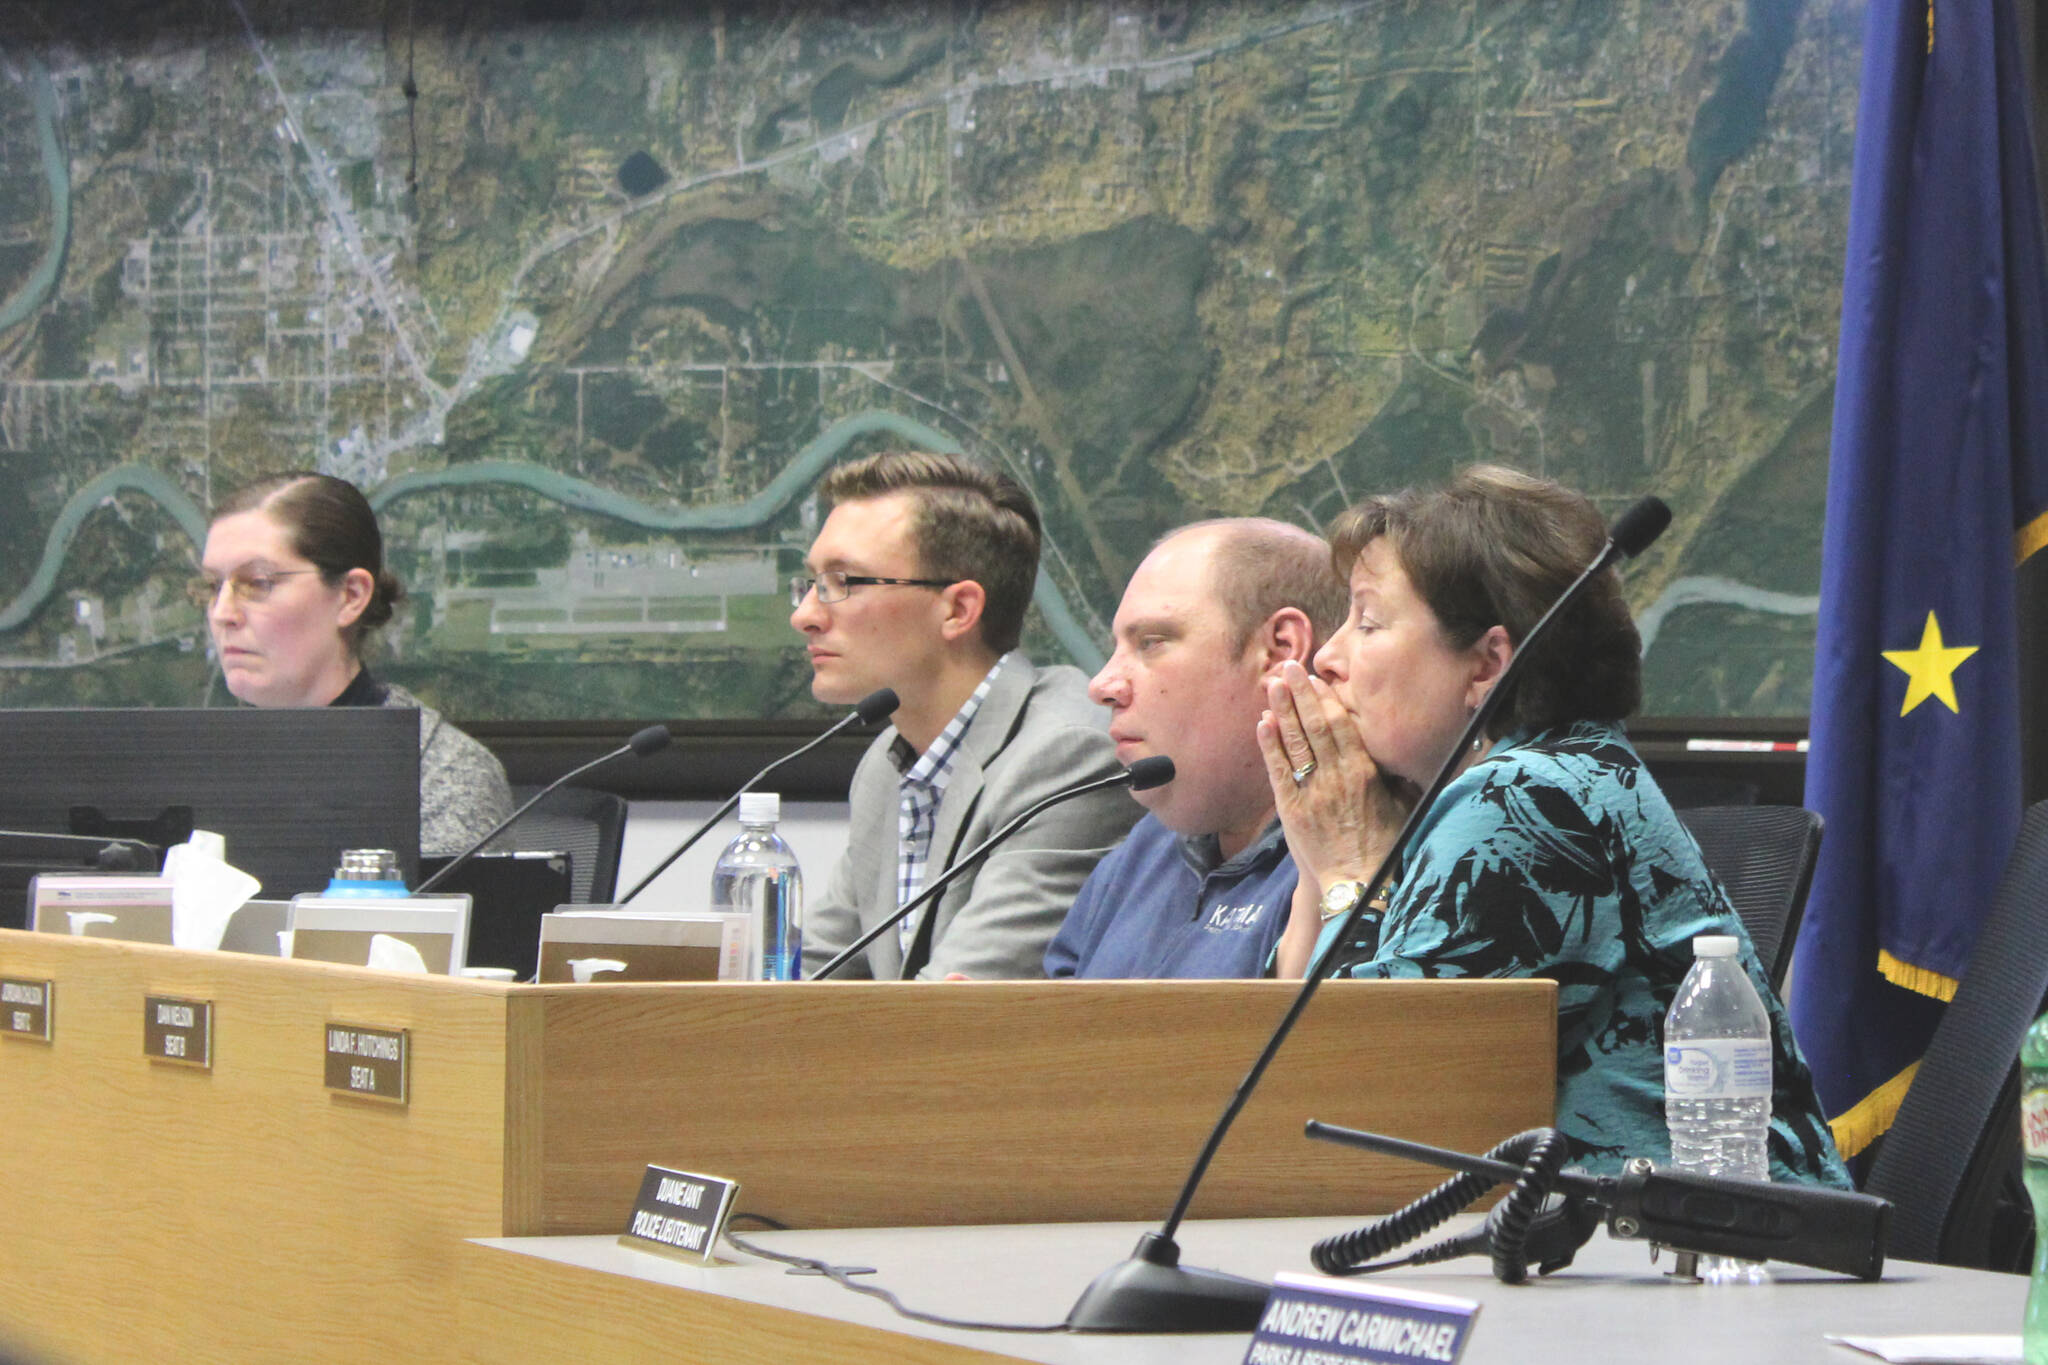 From right, Soldotna City Council members Linda Farnsworth-Hutchings, Dan Nelson and Jordan Chilson listen to testimony during a council meeting on Wednesday, July 13, 2022, in Soldotna, Alaska. (Ashlyn O’Hara/Peninsula Clarion)